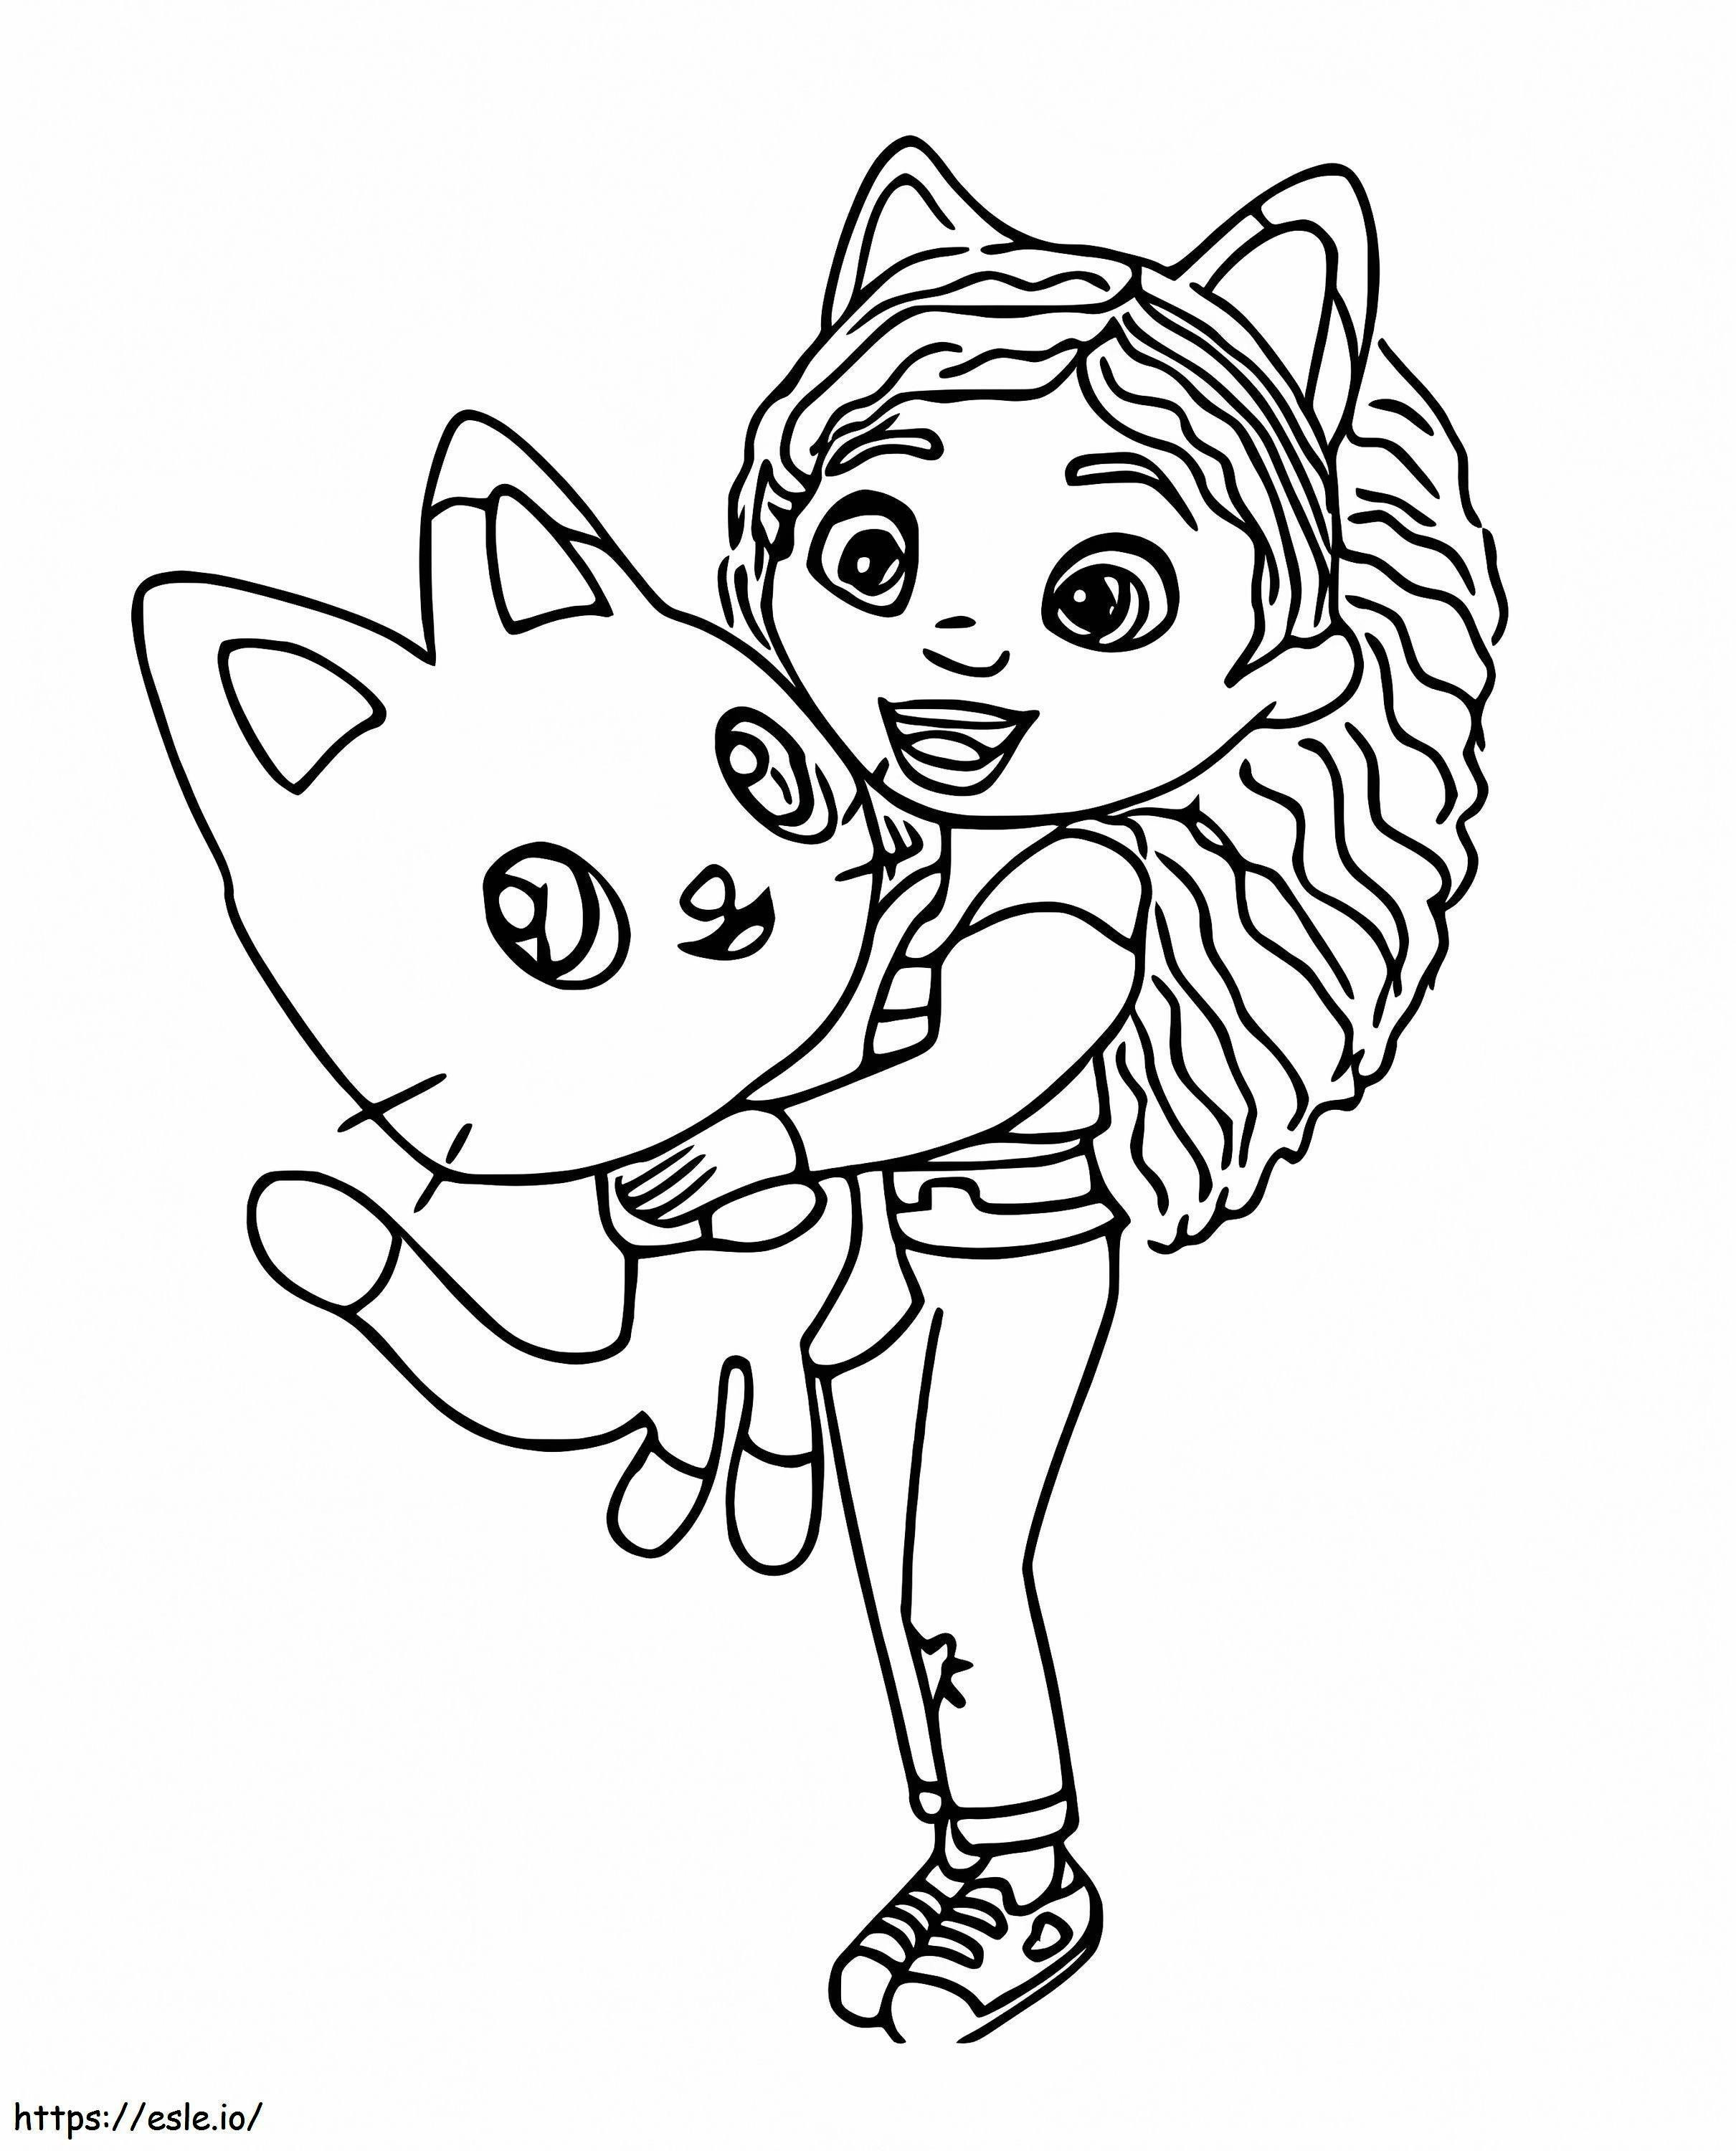 Gabby And Pandy Paws coloring page